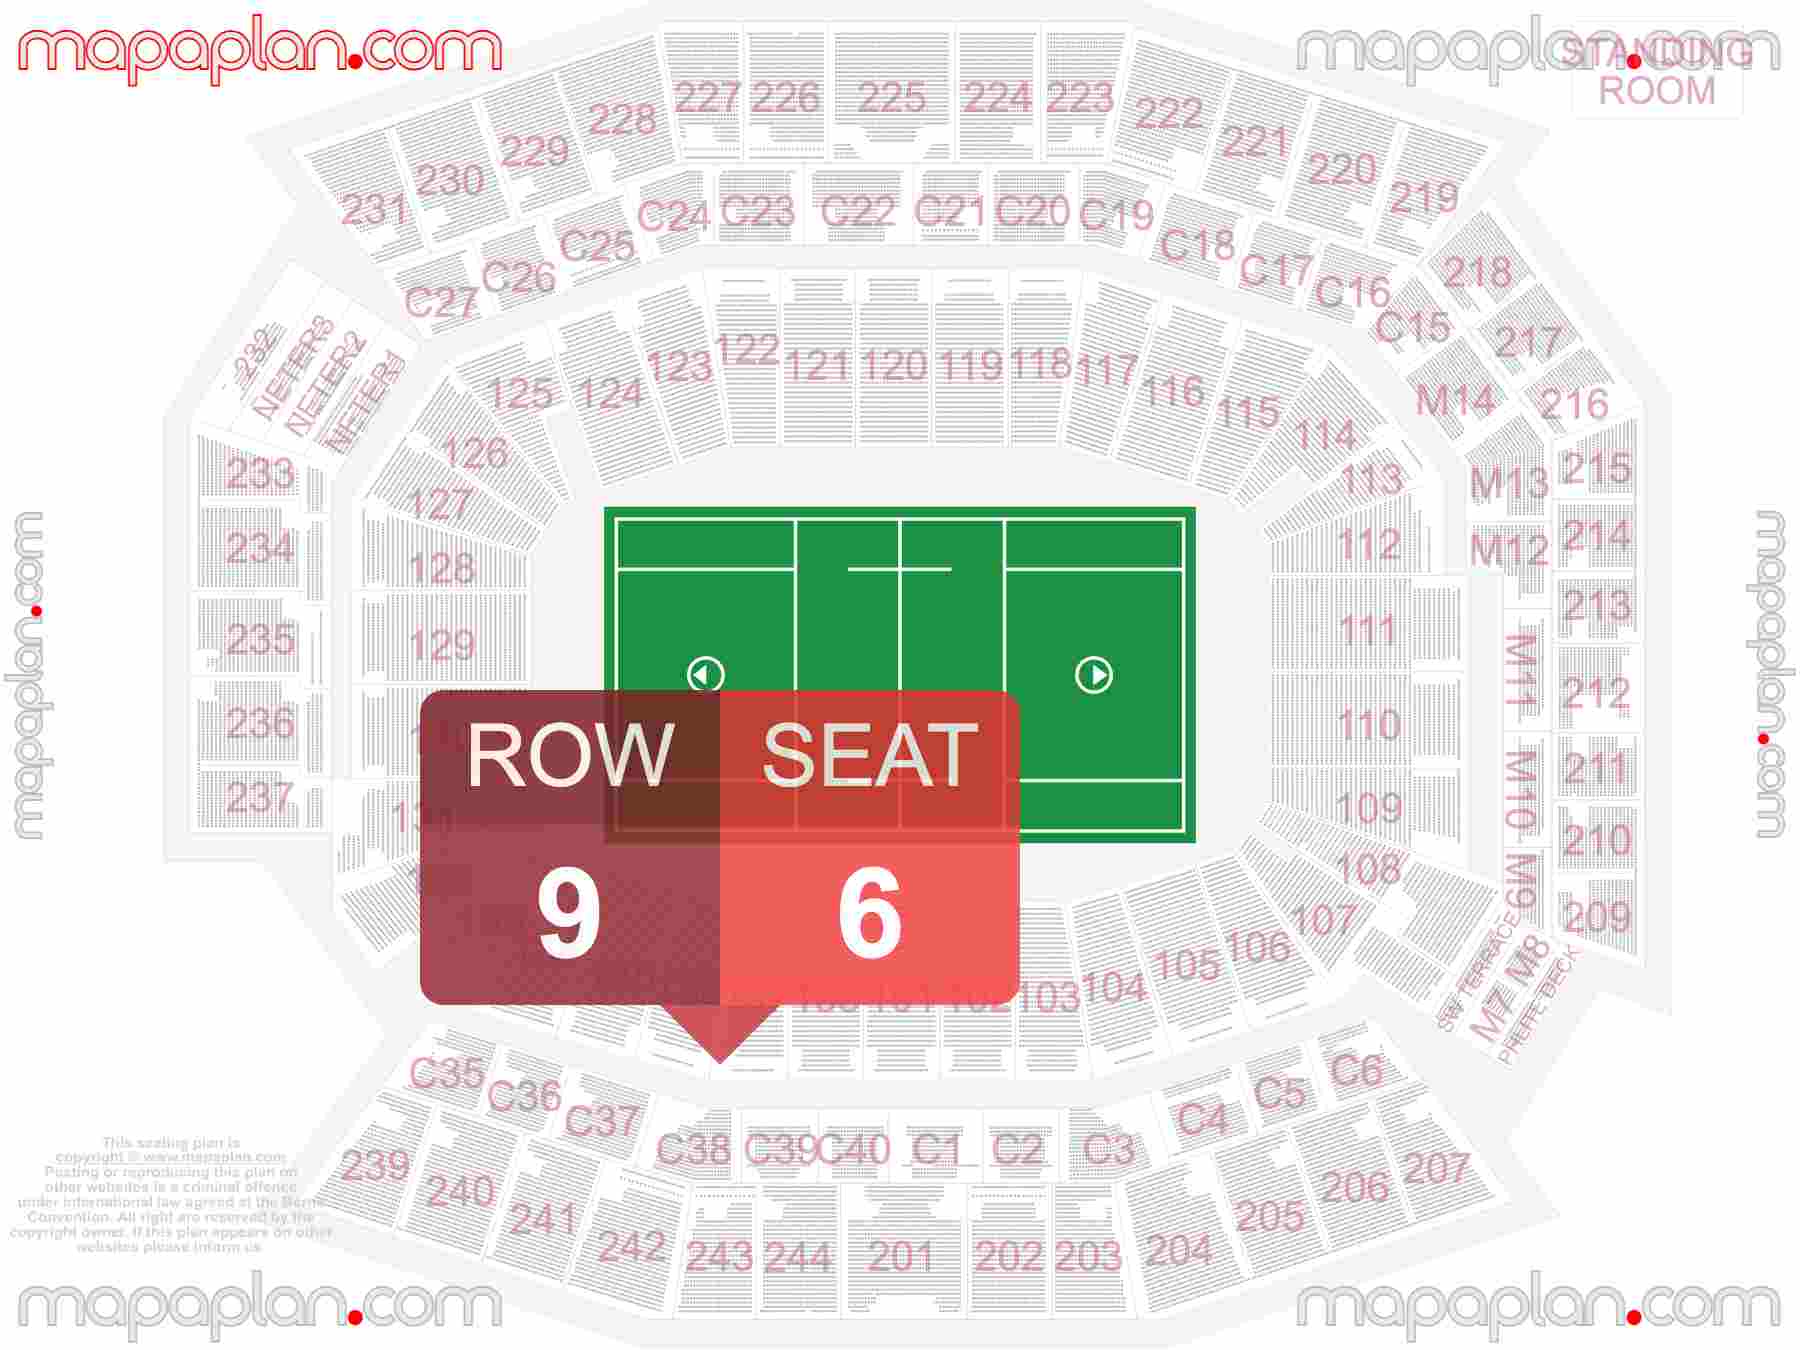 Philadelphia Lincoln Financial Field seating chart Lacrosse find best seats row numbering system plan showing how many seats per row - Individual 'find my seat' virtual locator